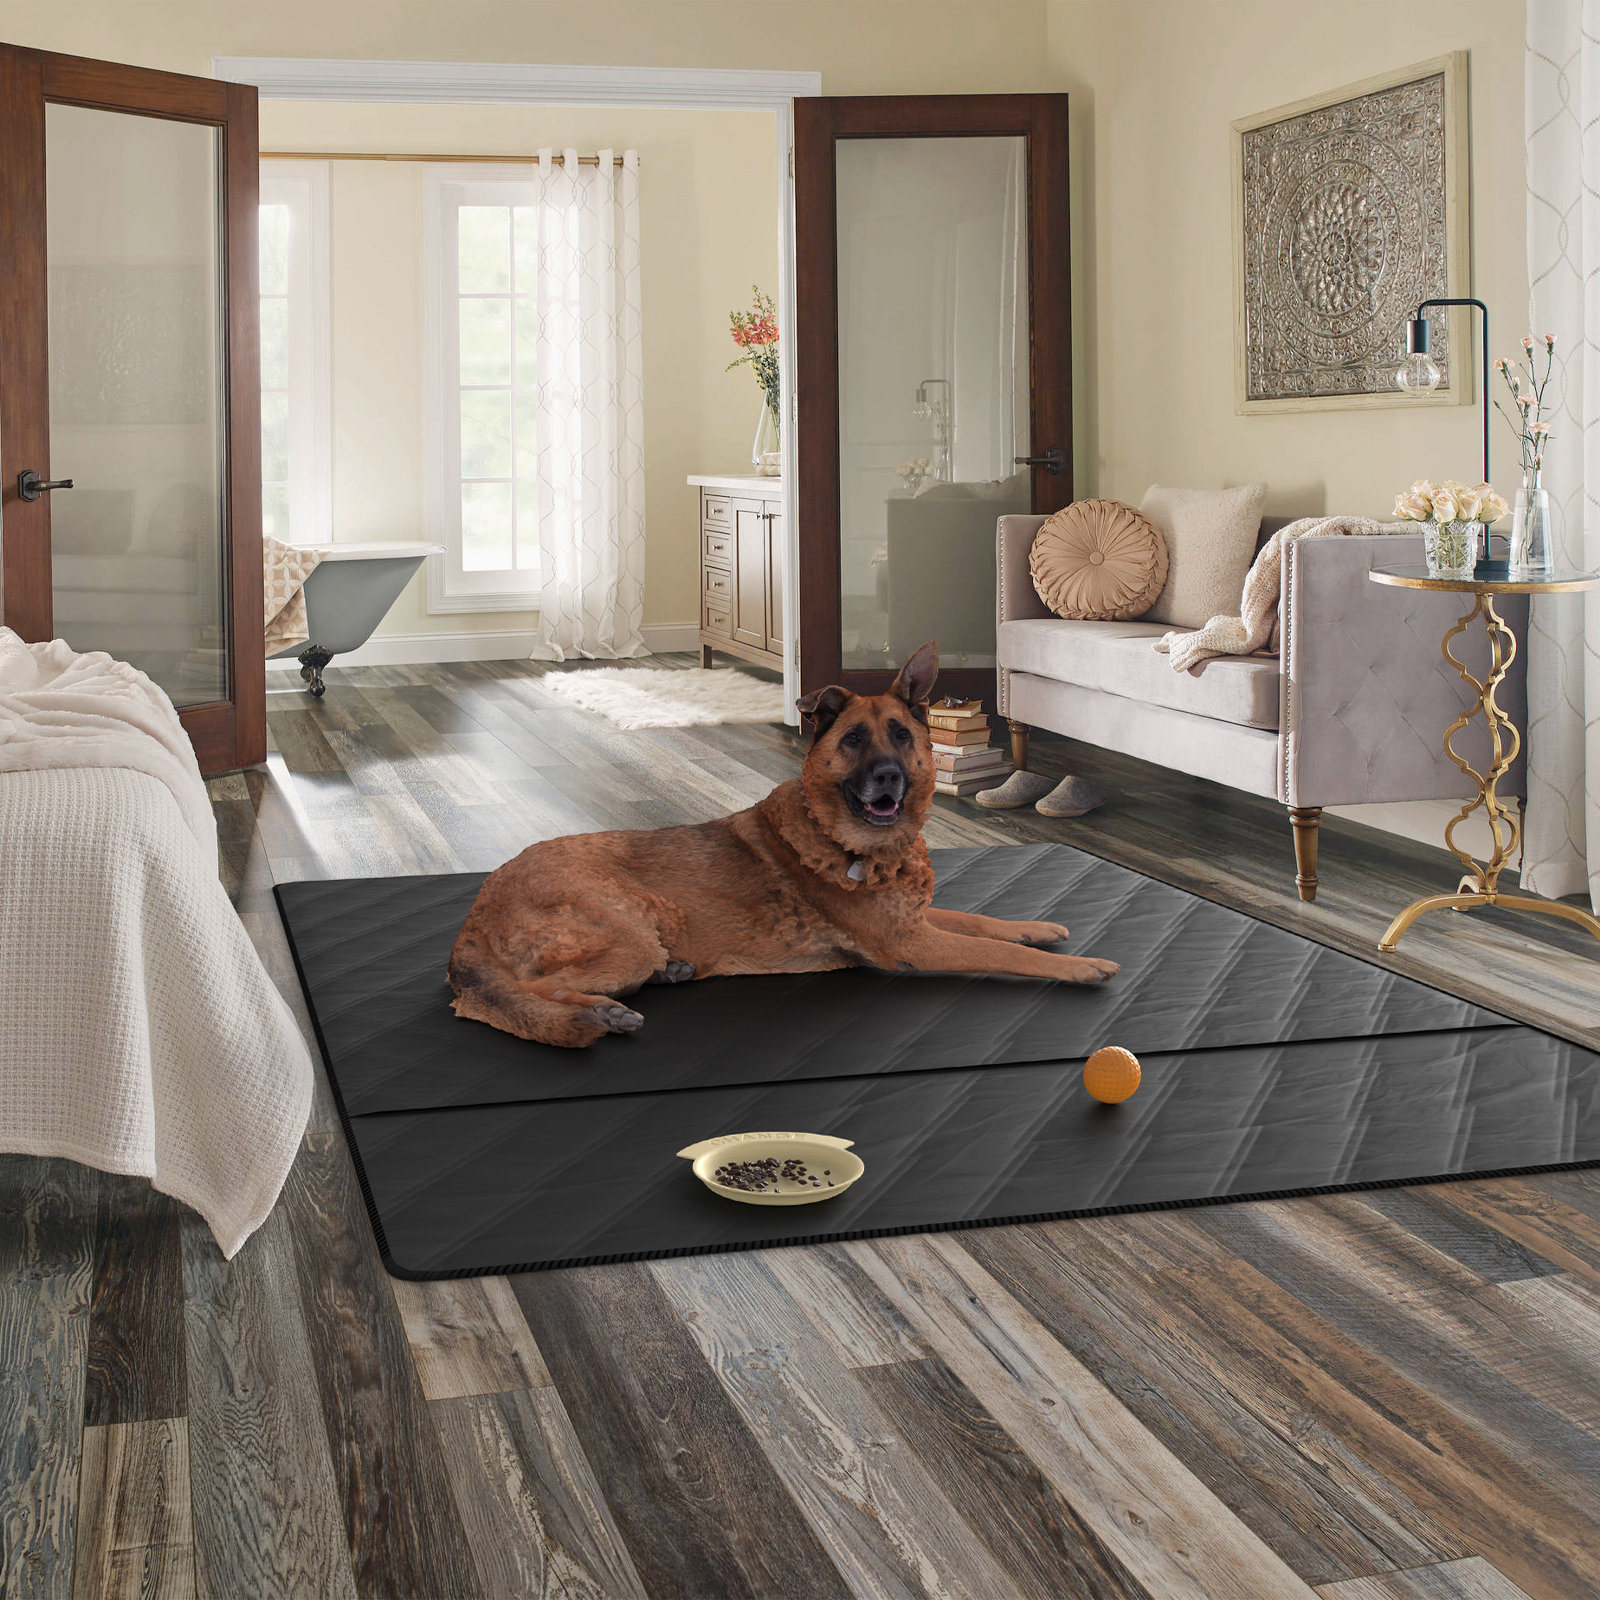 Top 3 Best Rugs For Dogs That Pee